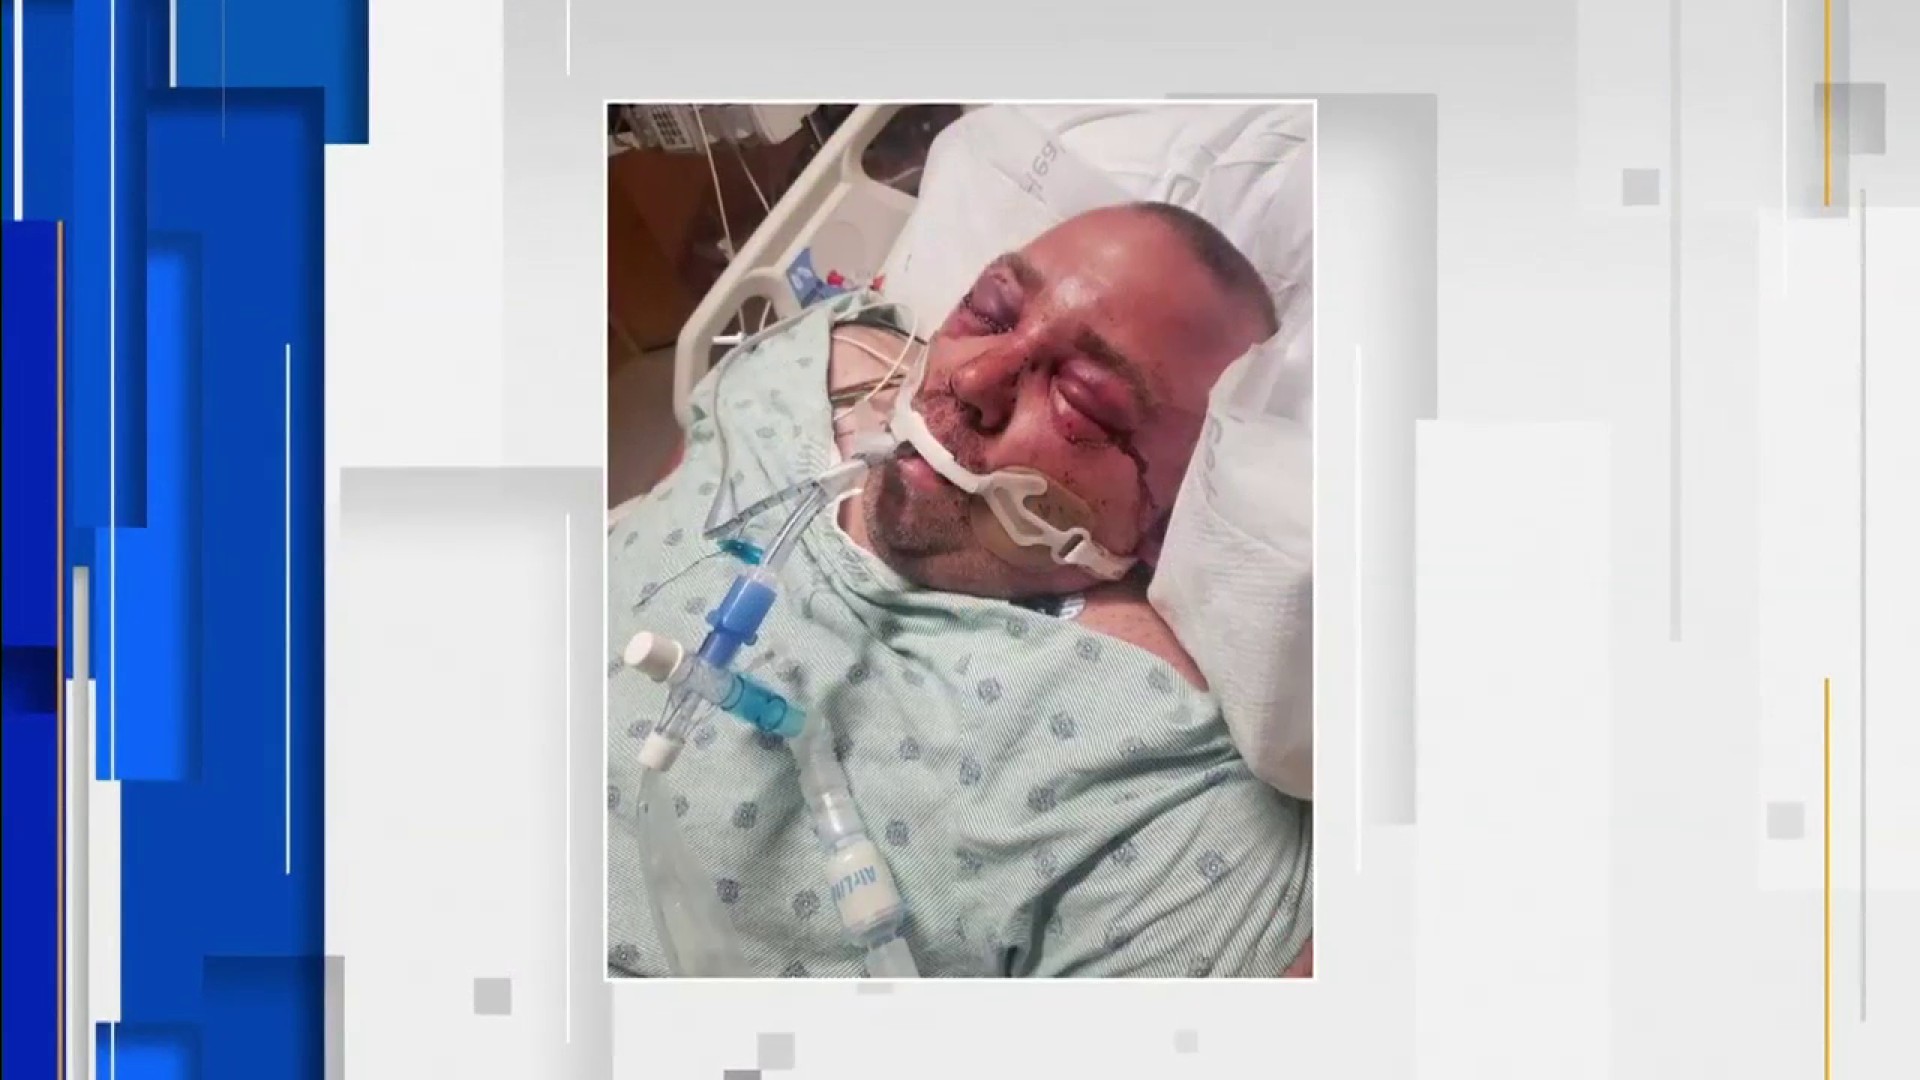 Hollywood beating victim remains hospitalized as family members push police  for answers